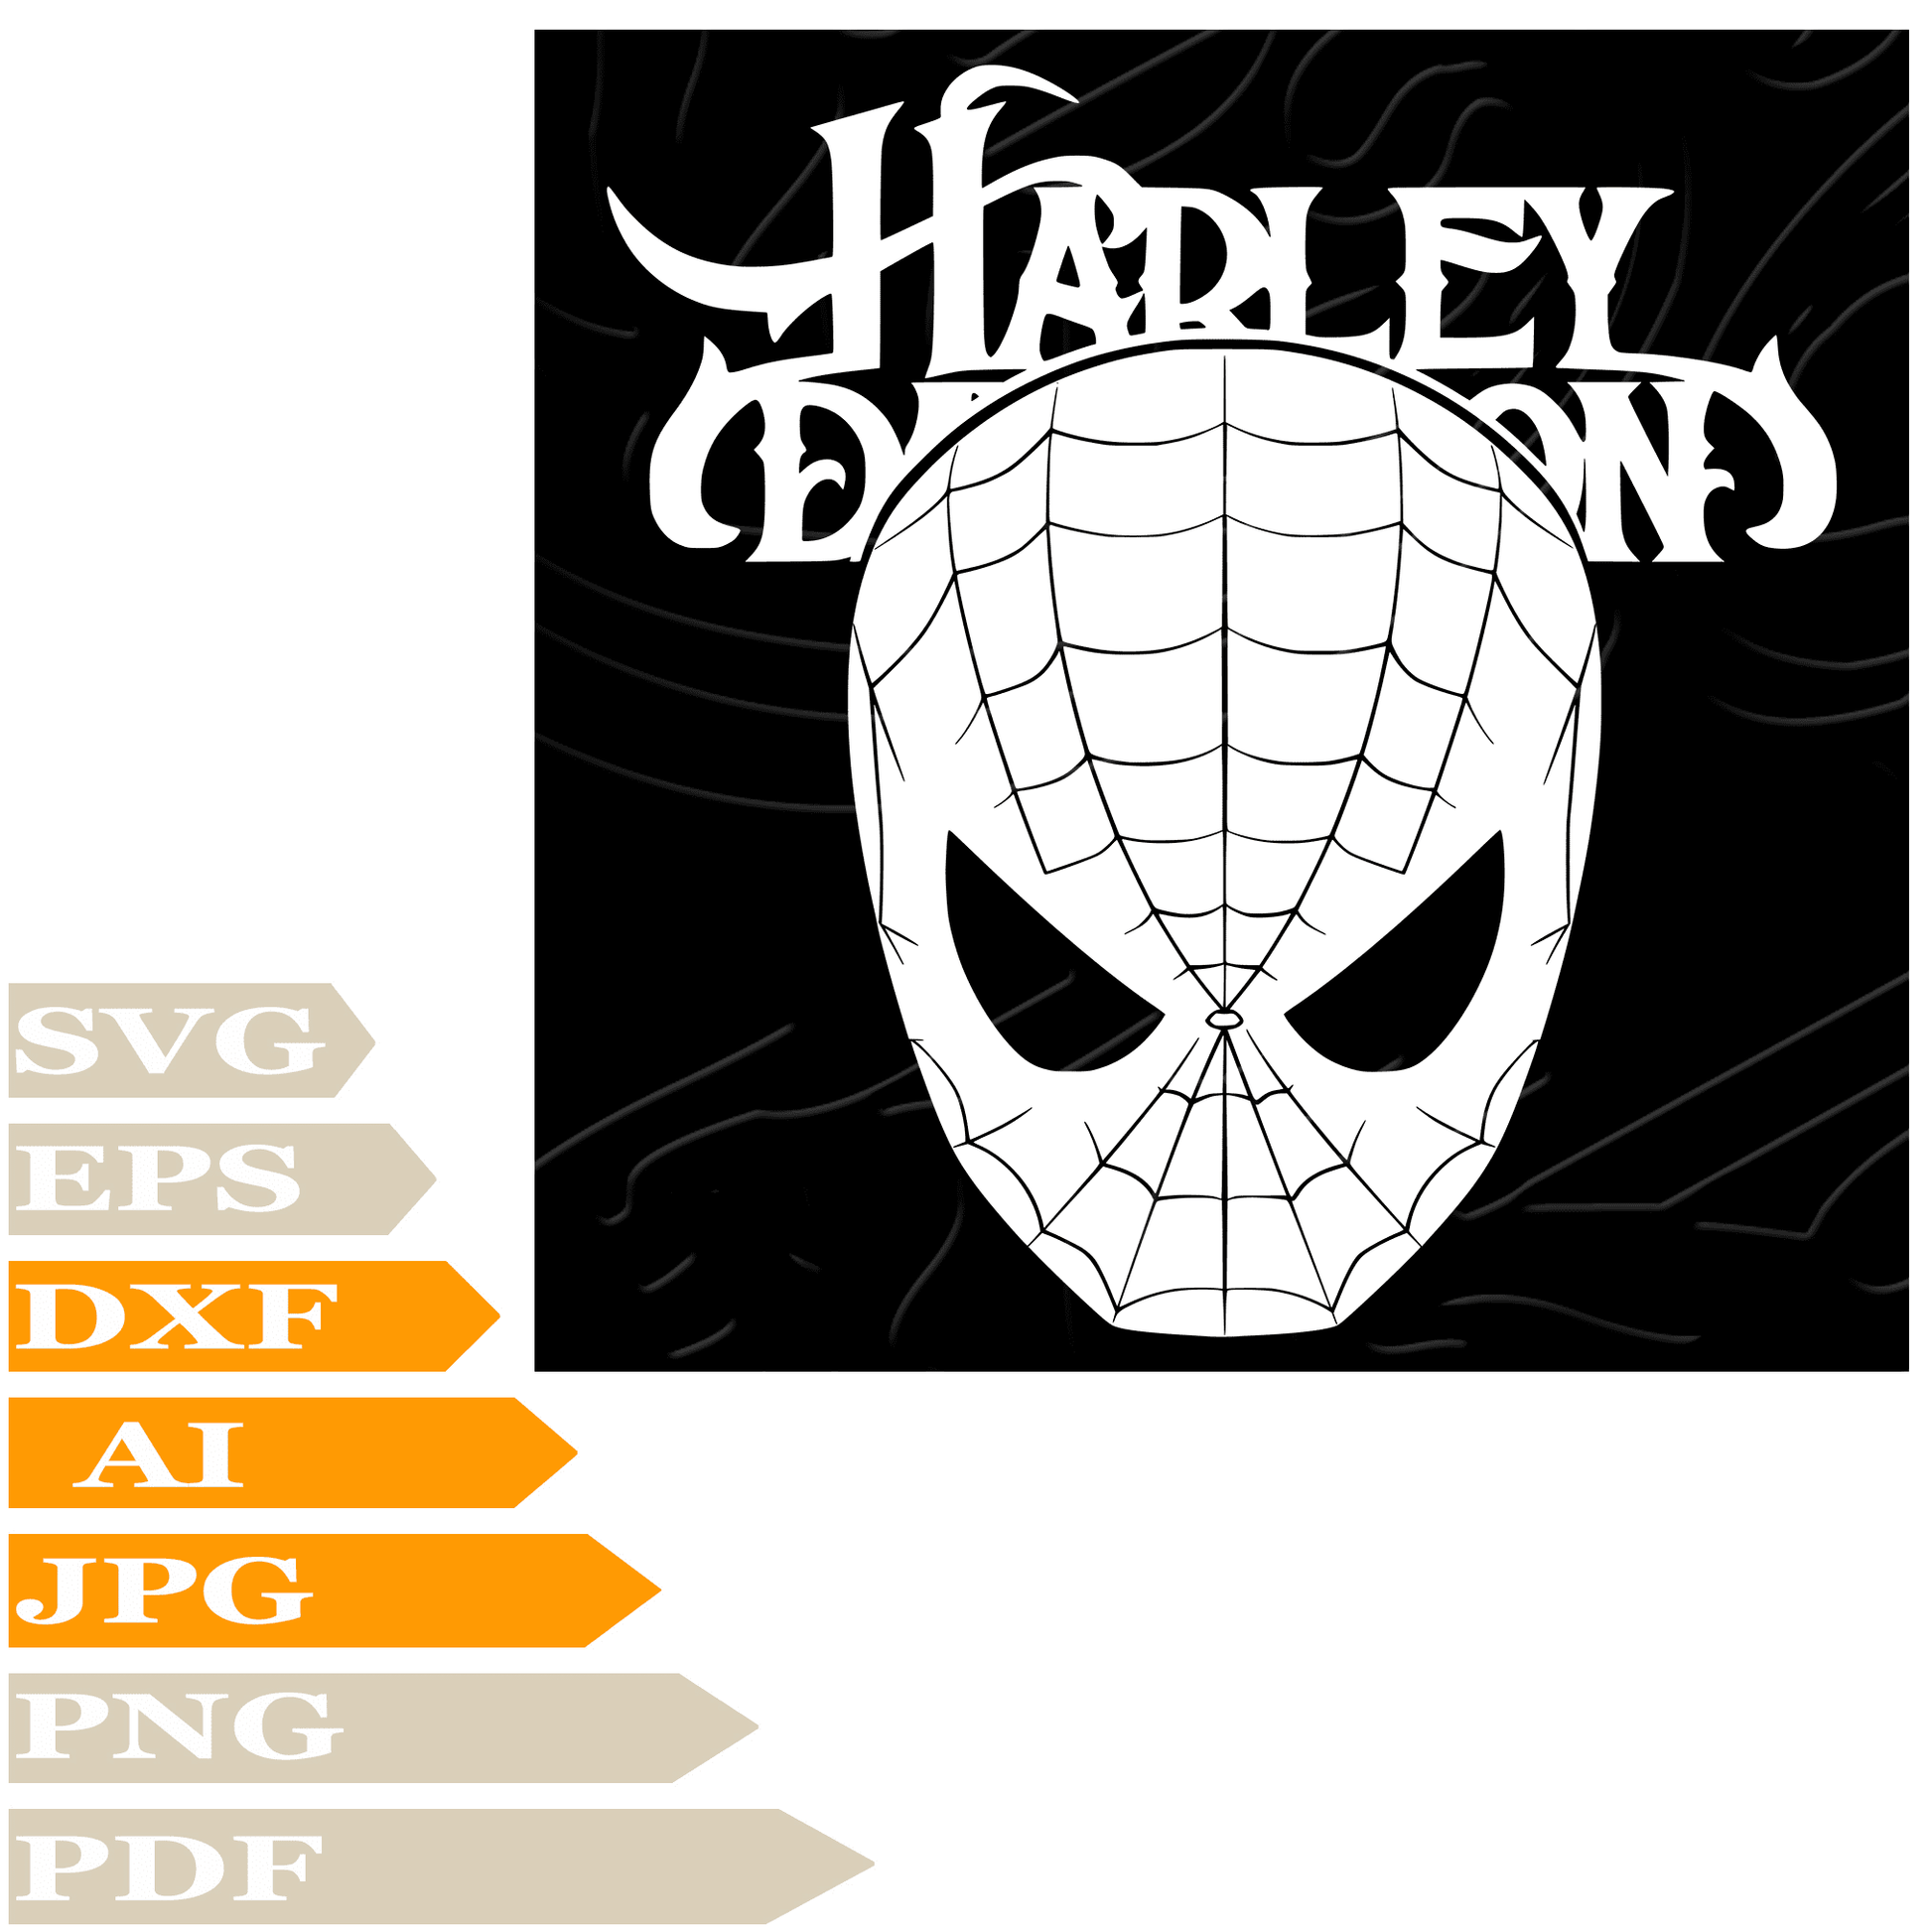 Spiderman SVG-Spiderman Head SVG File-Spiderman Harley Davidson Drawing SVG-Spiderman Harley Davdson Vector Clip art-Image Cut Files-Illustration-PNG-For Cricut -Instant download-For Shirts-Silhouette